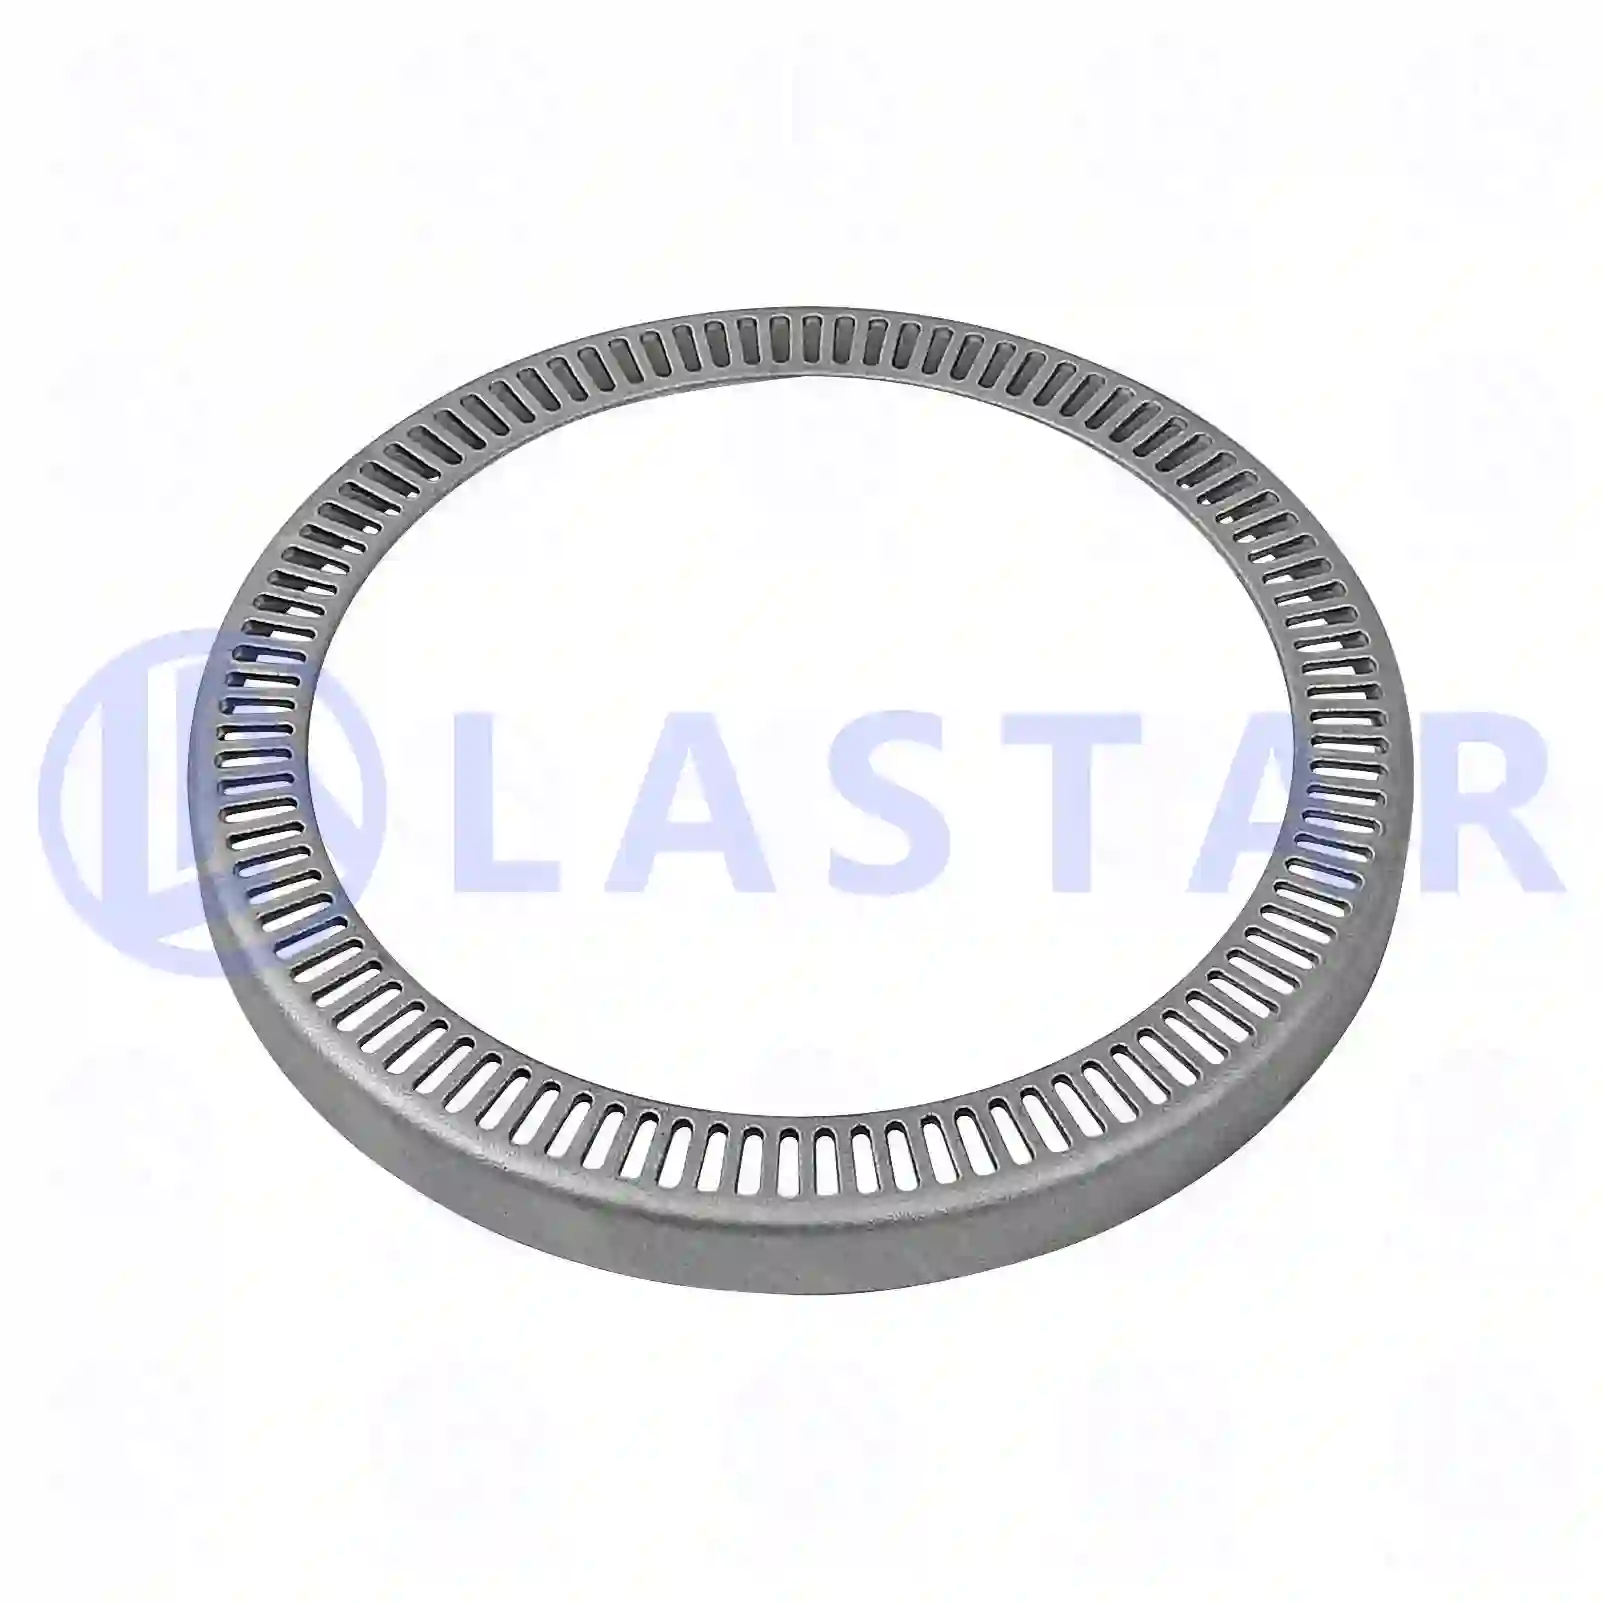 ABS ring, 77726233, 1391515, 1805821, ZG50020-0008, ||  77726233 Lastar Spare Part | Truck Spare Parts, Auotomotive Spare Parts ABS ring, 77726233, 1391515, 1805821, ZG50020-0008, ||  77726233 Lastar Spare Part | Truck Spare Parts, Auotomotive Spare Parts